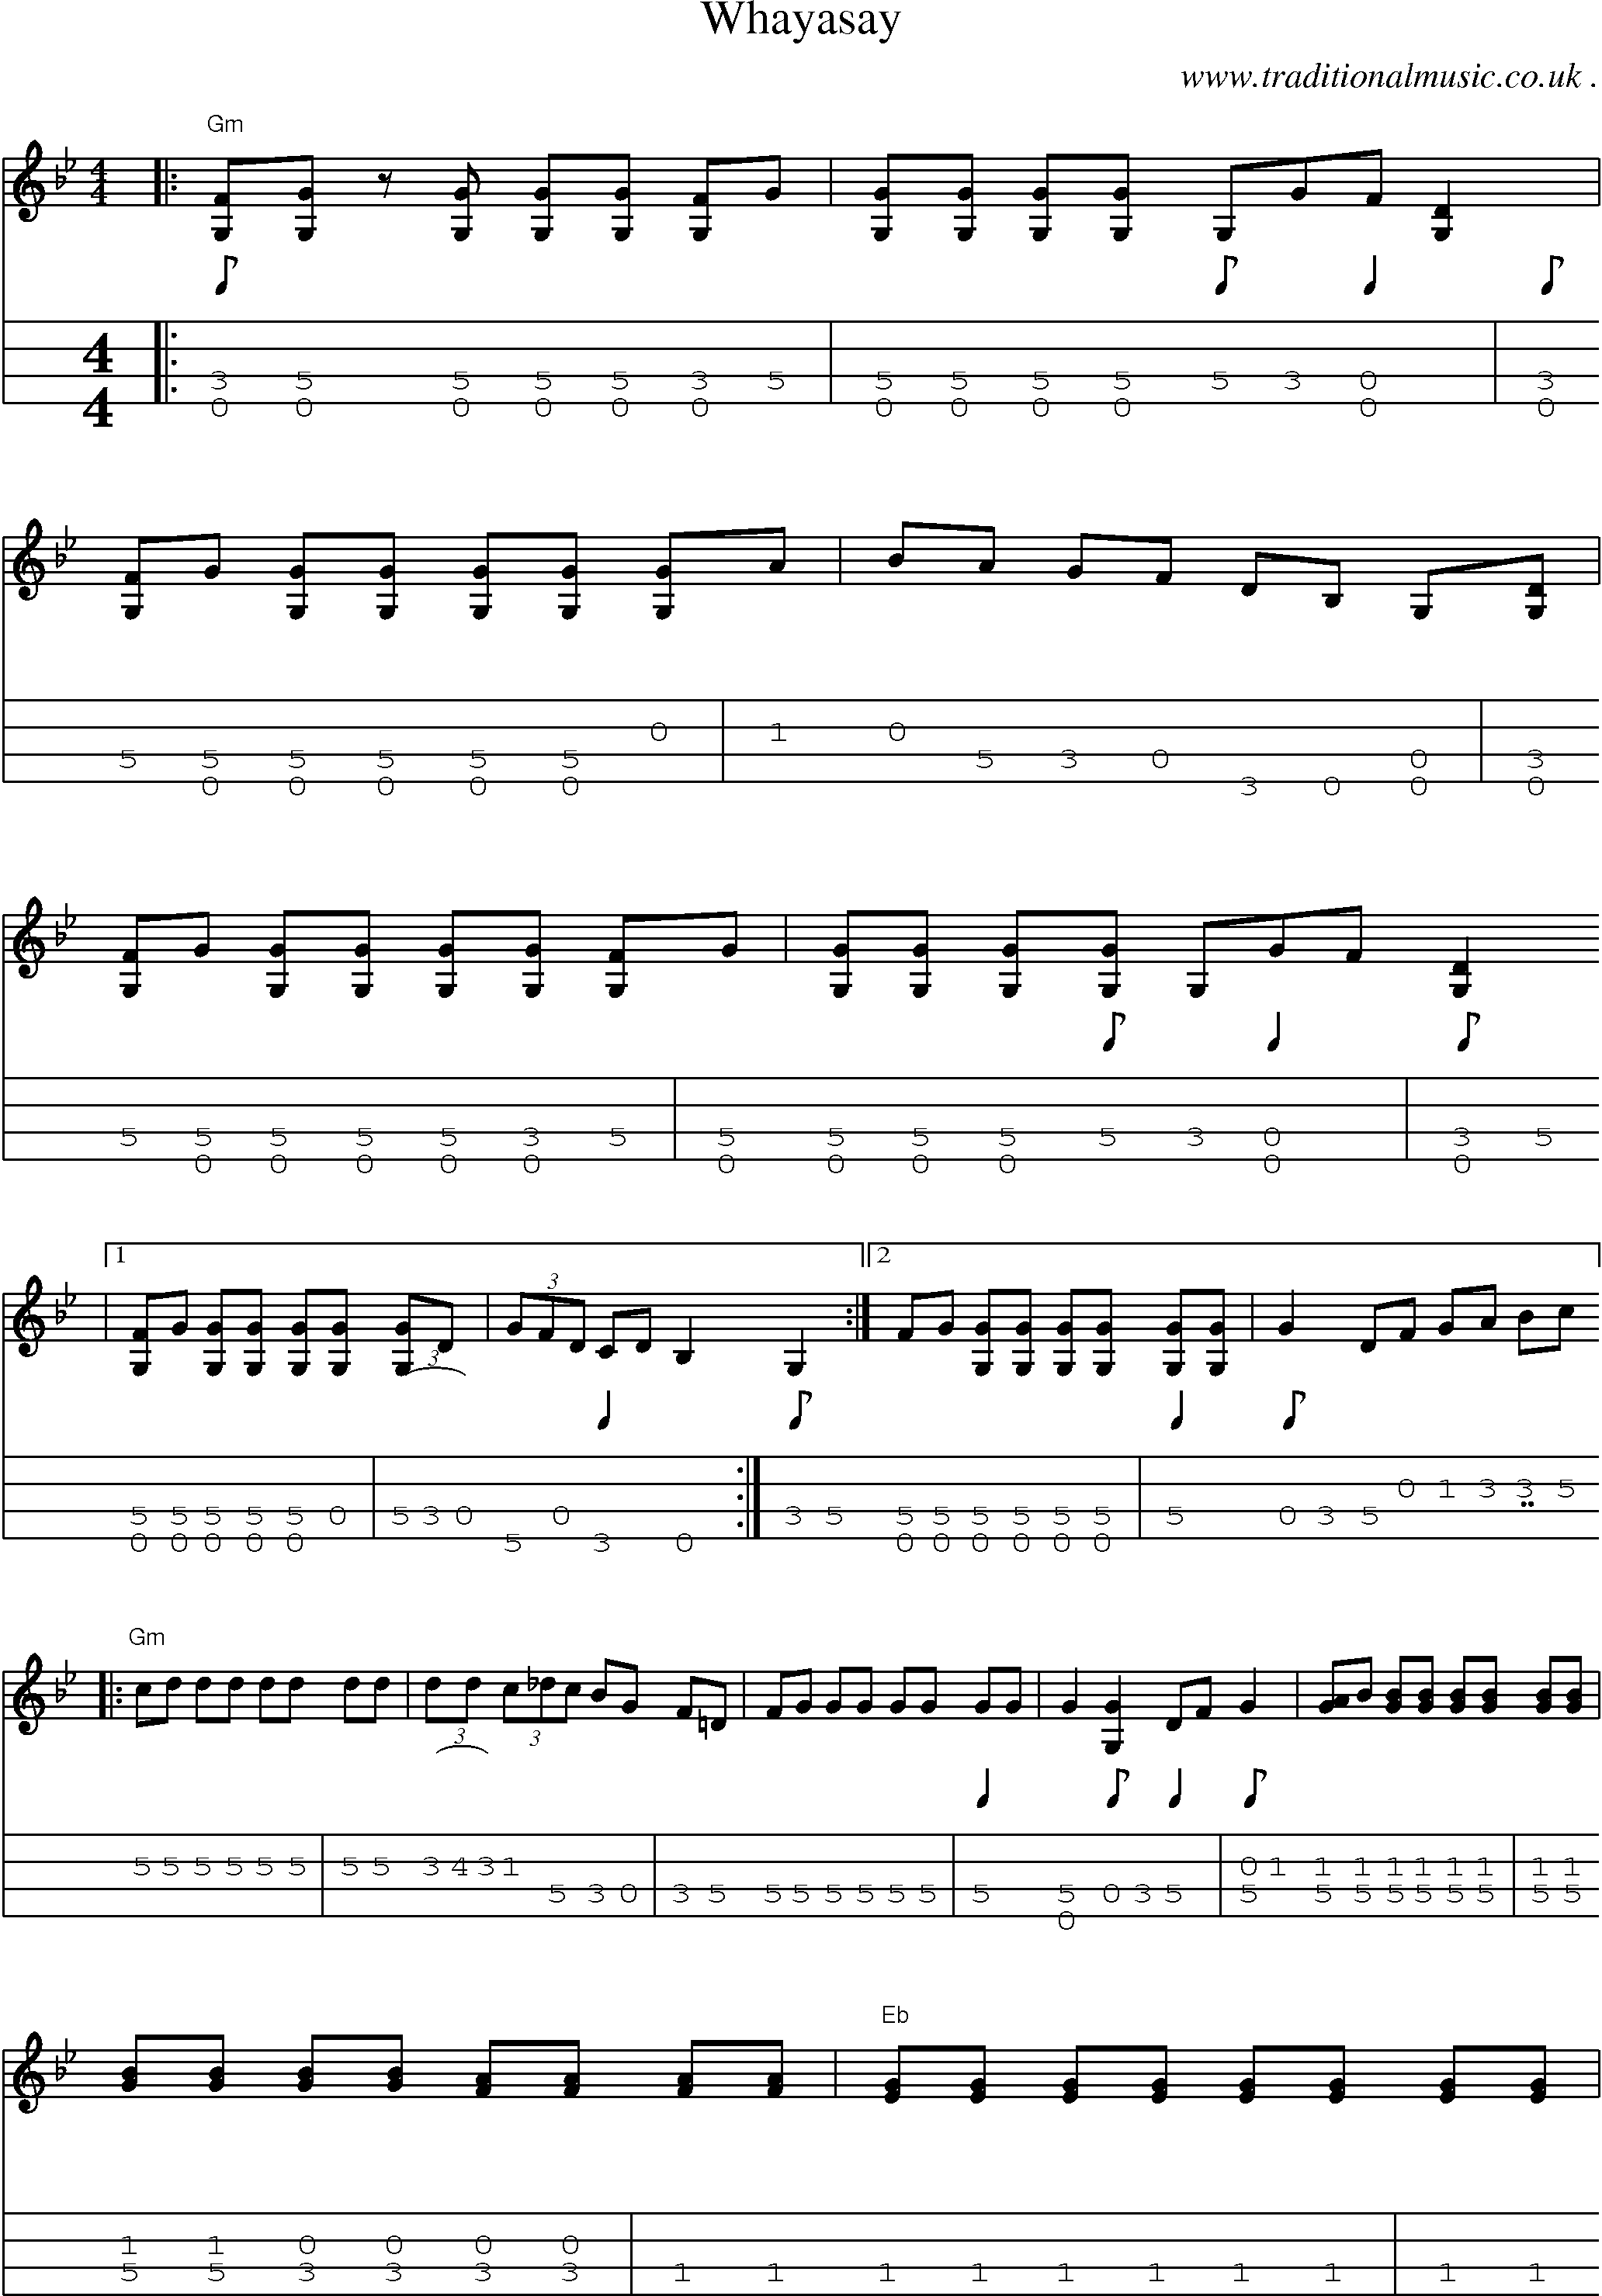 Music Score and Guitar Tabs for Whayasay